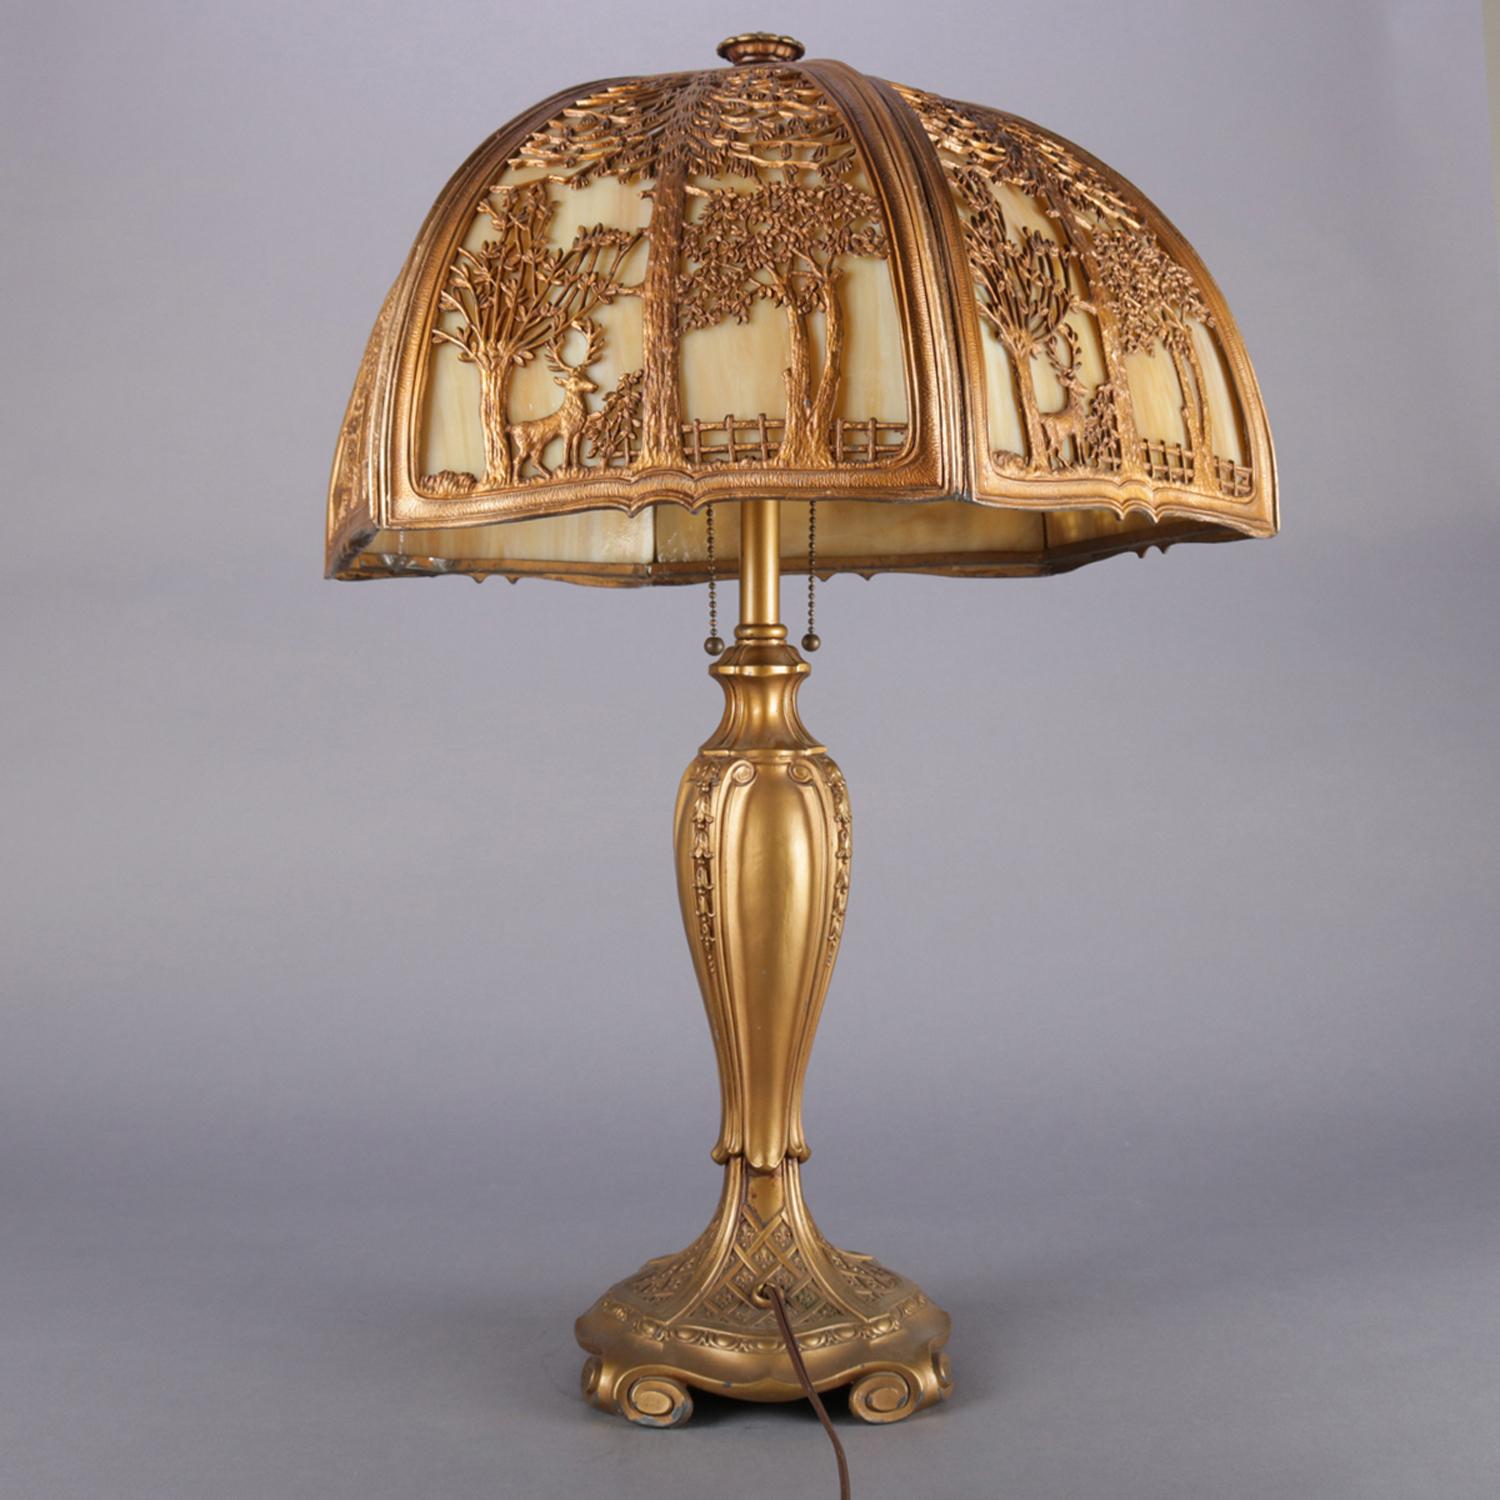 Arts & Crafts Bradley & Hubbard School table lamp features gilt metal base with inverted bellflower decoration and scroll form feet, shade with cast and pierced frame having woodland scene and housing slag glass panels, dual lights with independent